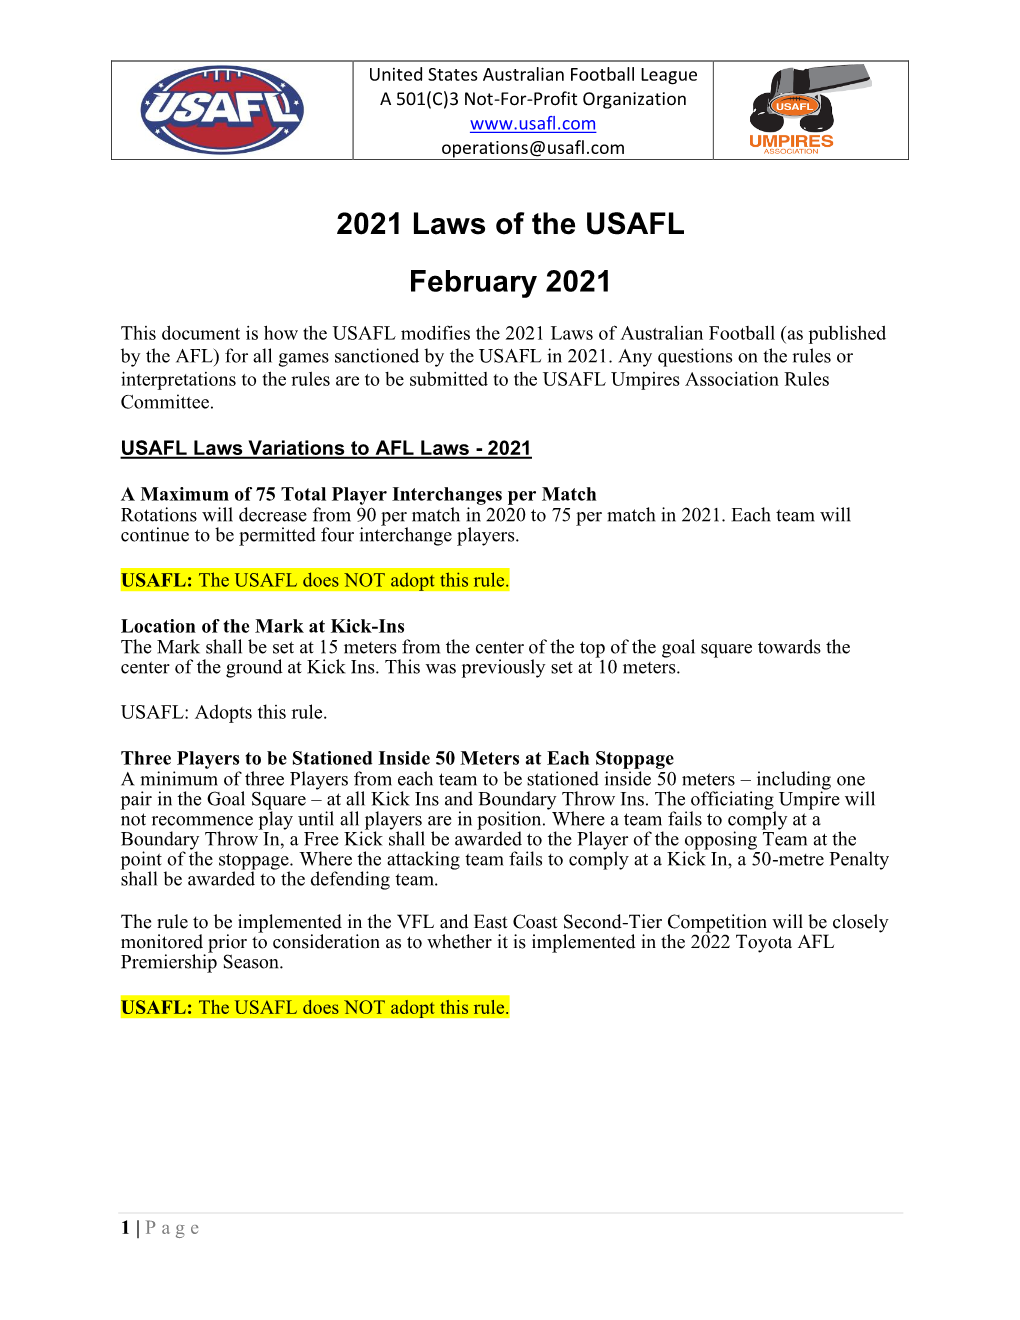 2021 Laws of United States Australian